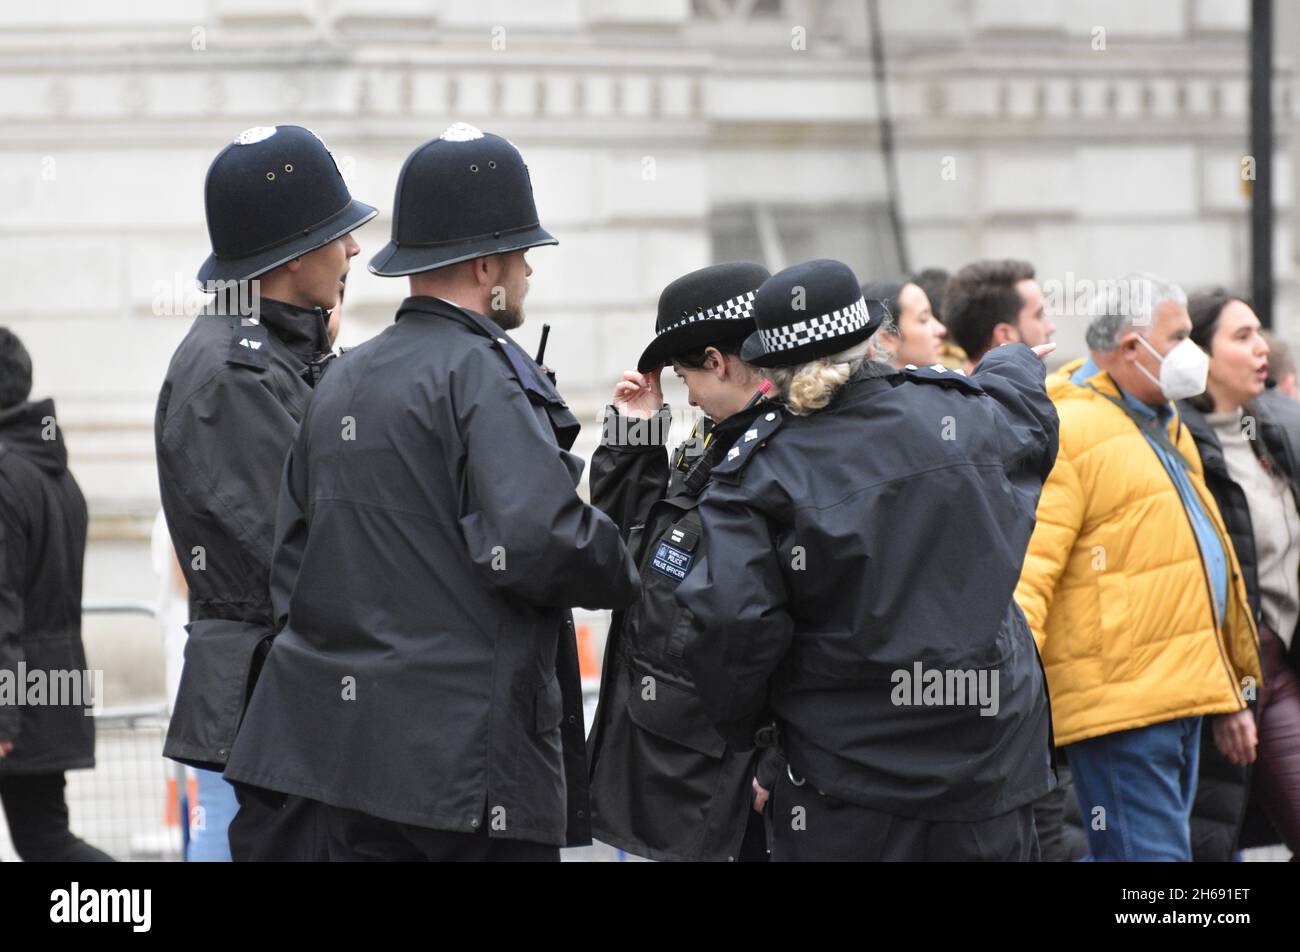 Four Metropolitan Uniformed Police Officers on duty in Westminster London. Two female and two male police officers stand together having a conversation. Stock Photo